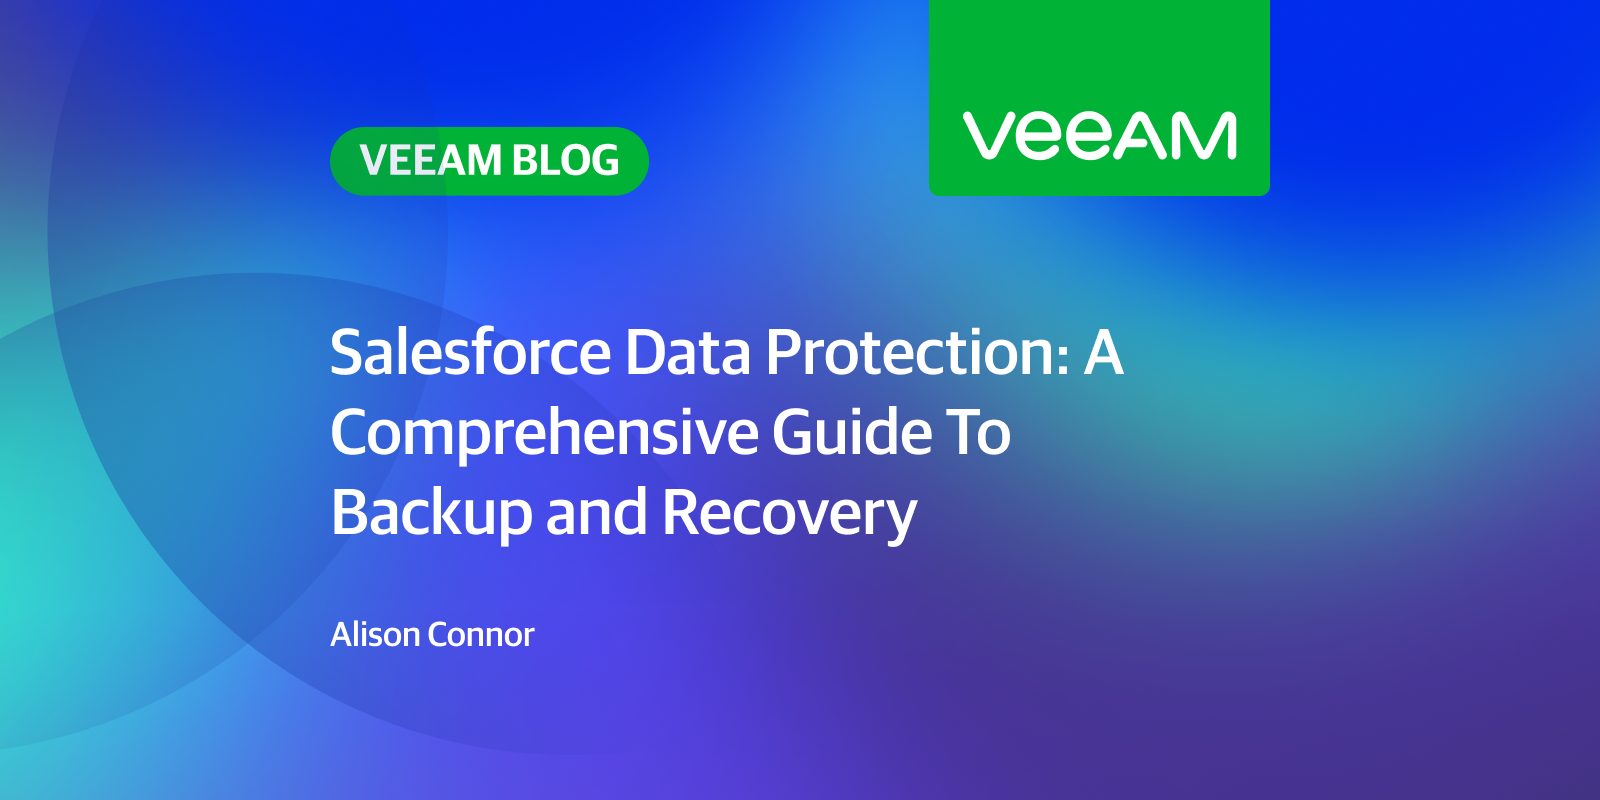 A Complete Guide To Backup and Recovery For Amazon Data Protection